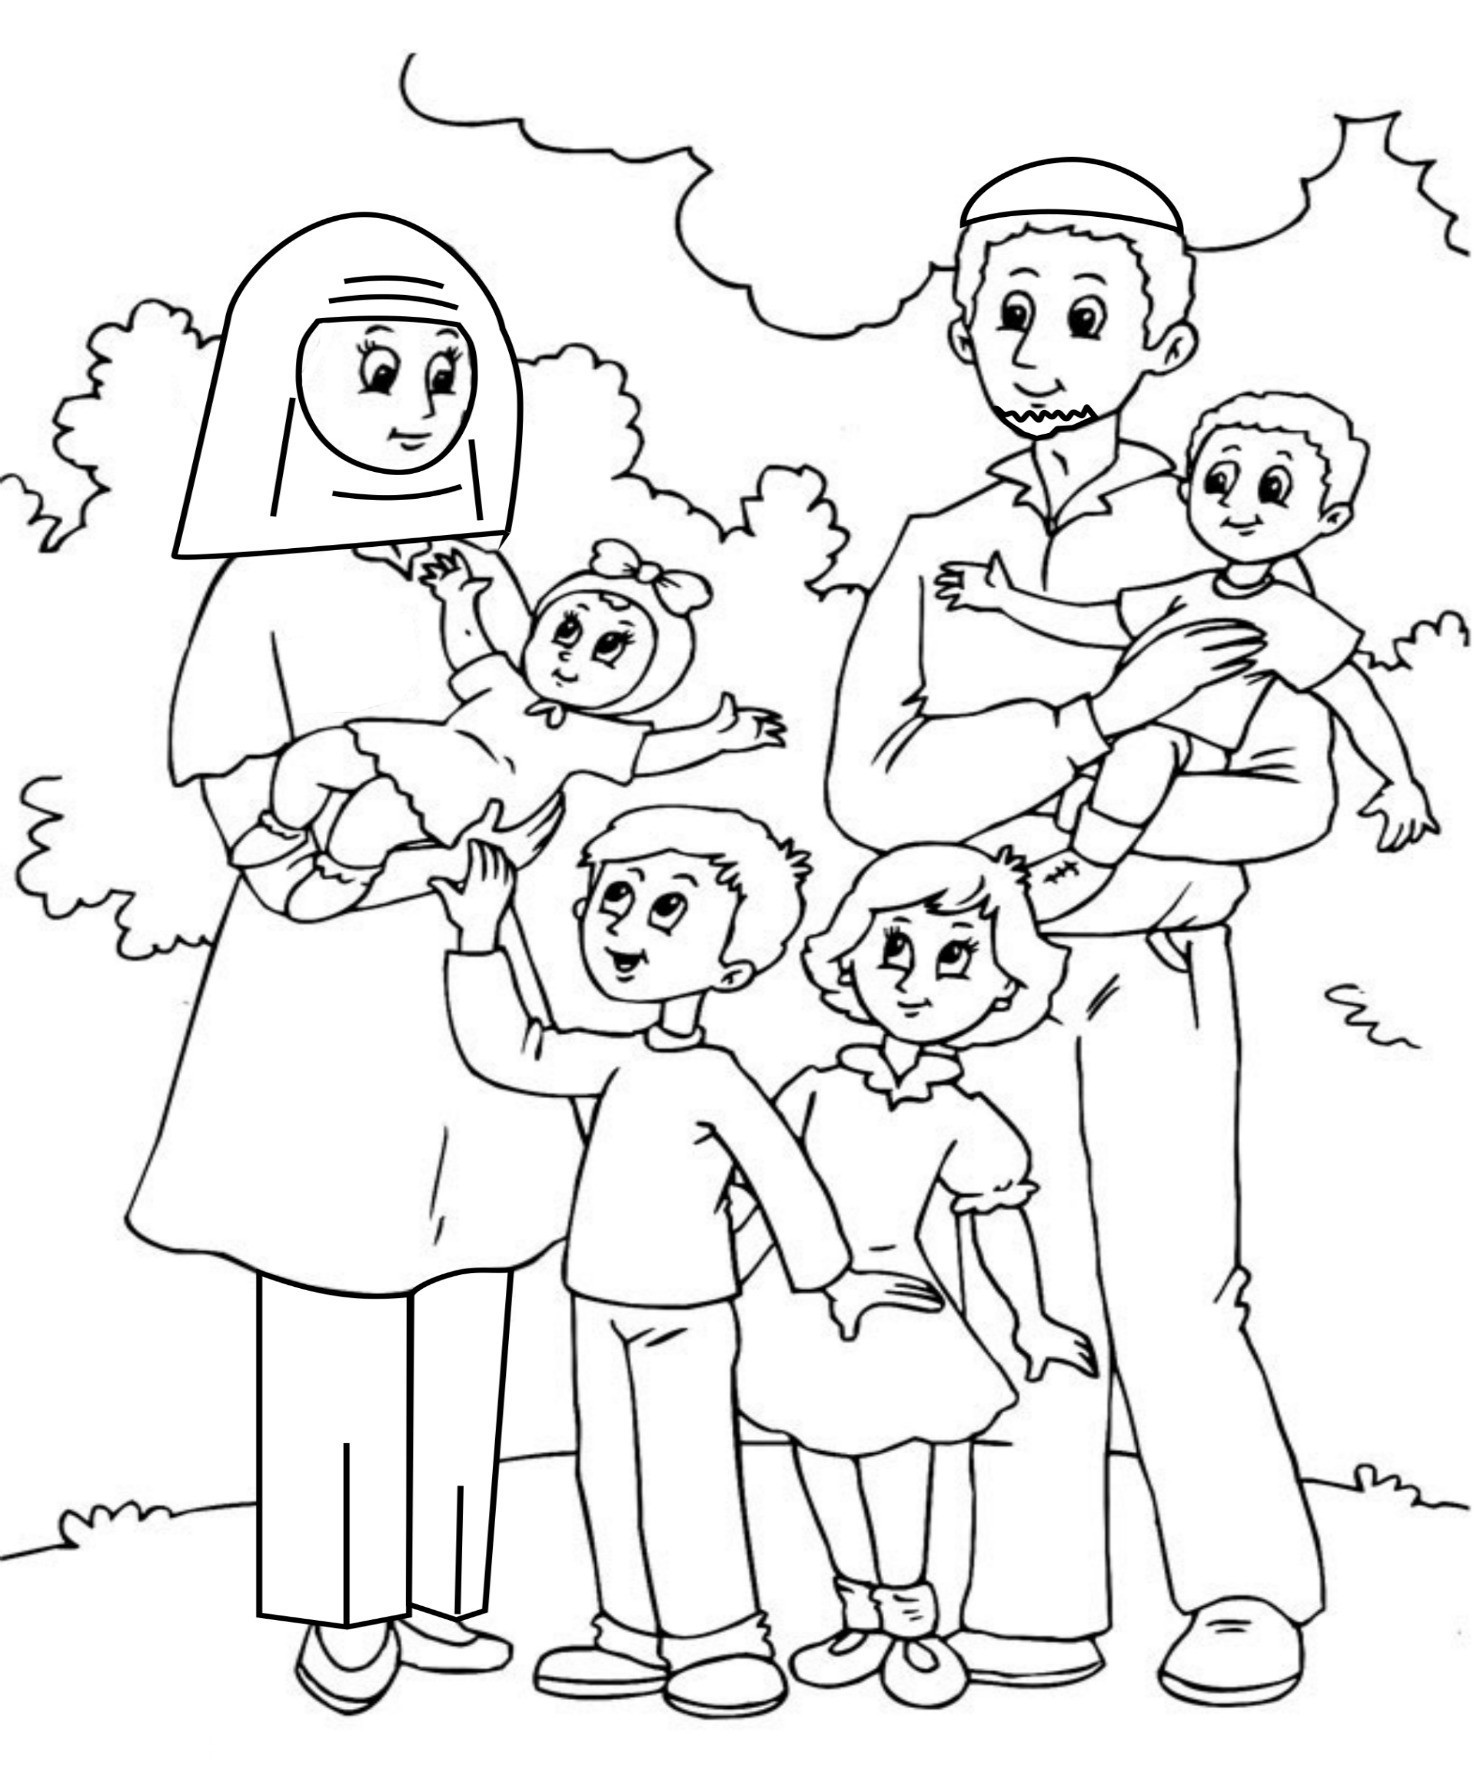 Family Coloring Pages For Toddlers
 Family Coloring Pages